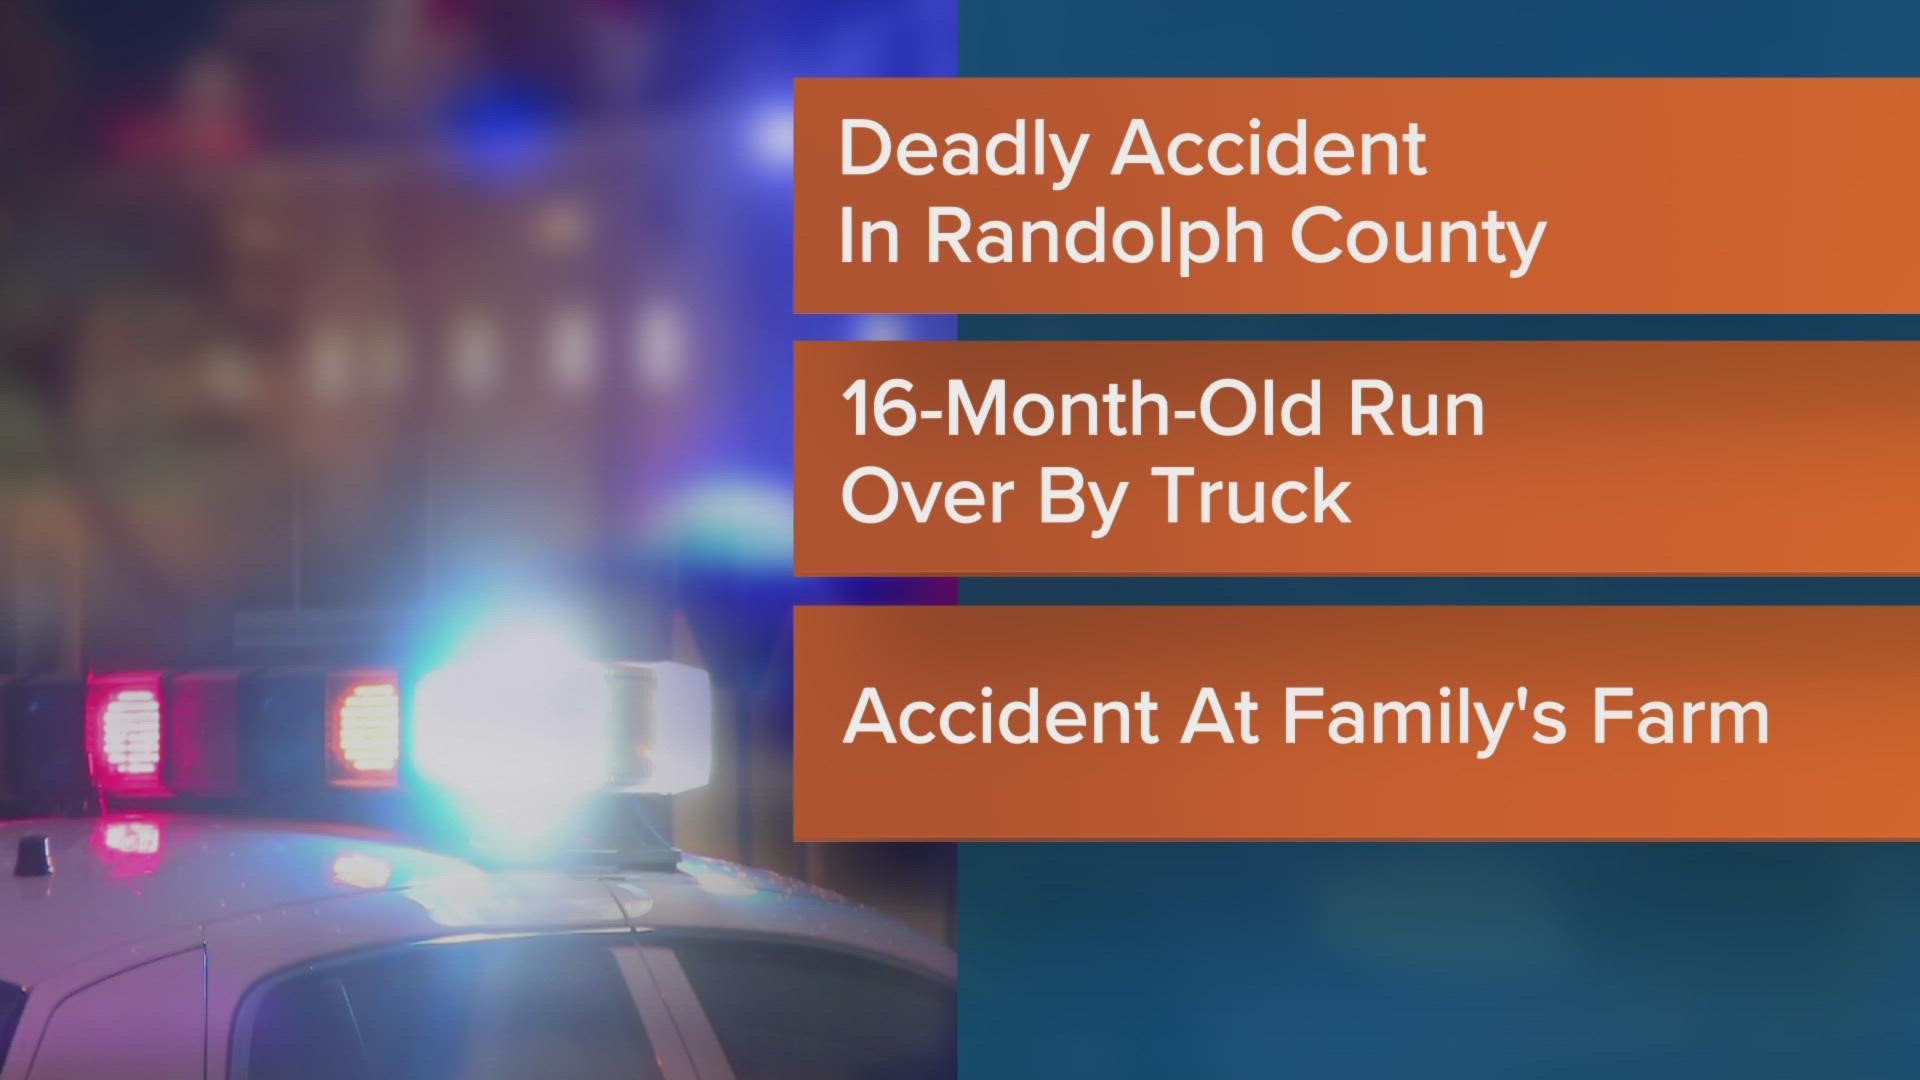 The sheriff said the boy's father accidentally ran over him when backing up a truck in a barn.